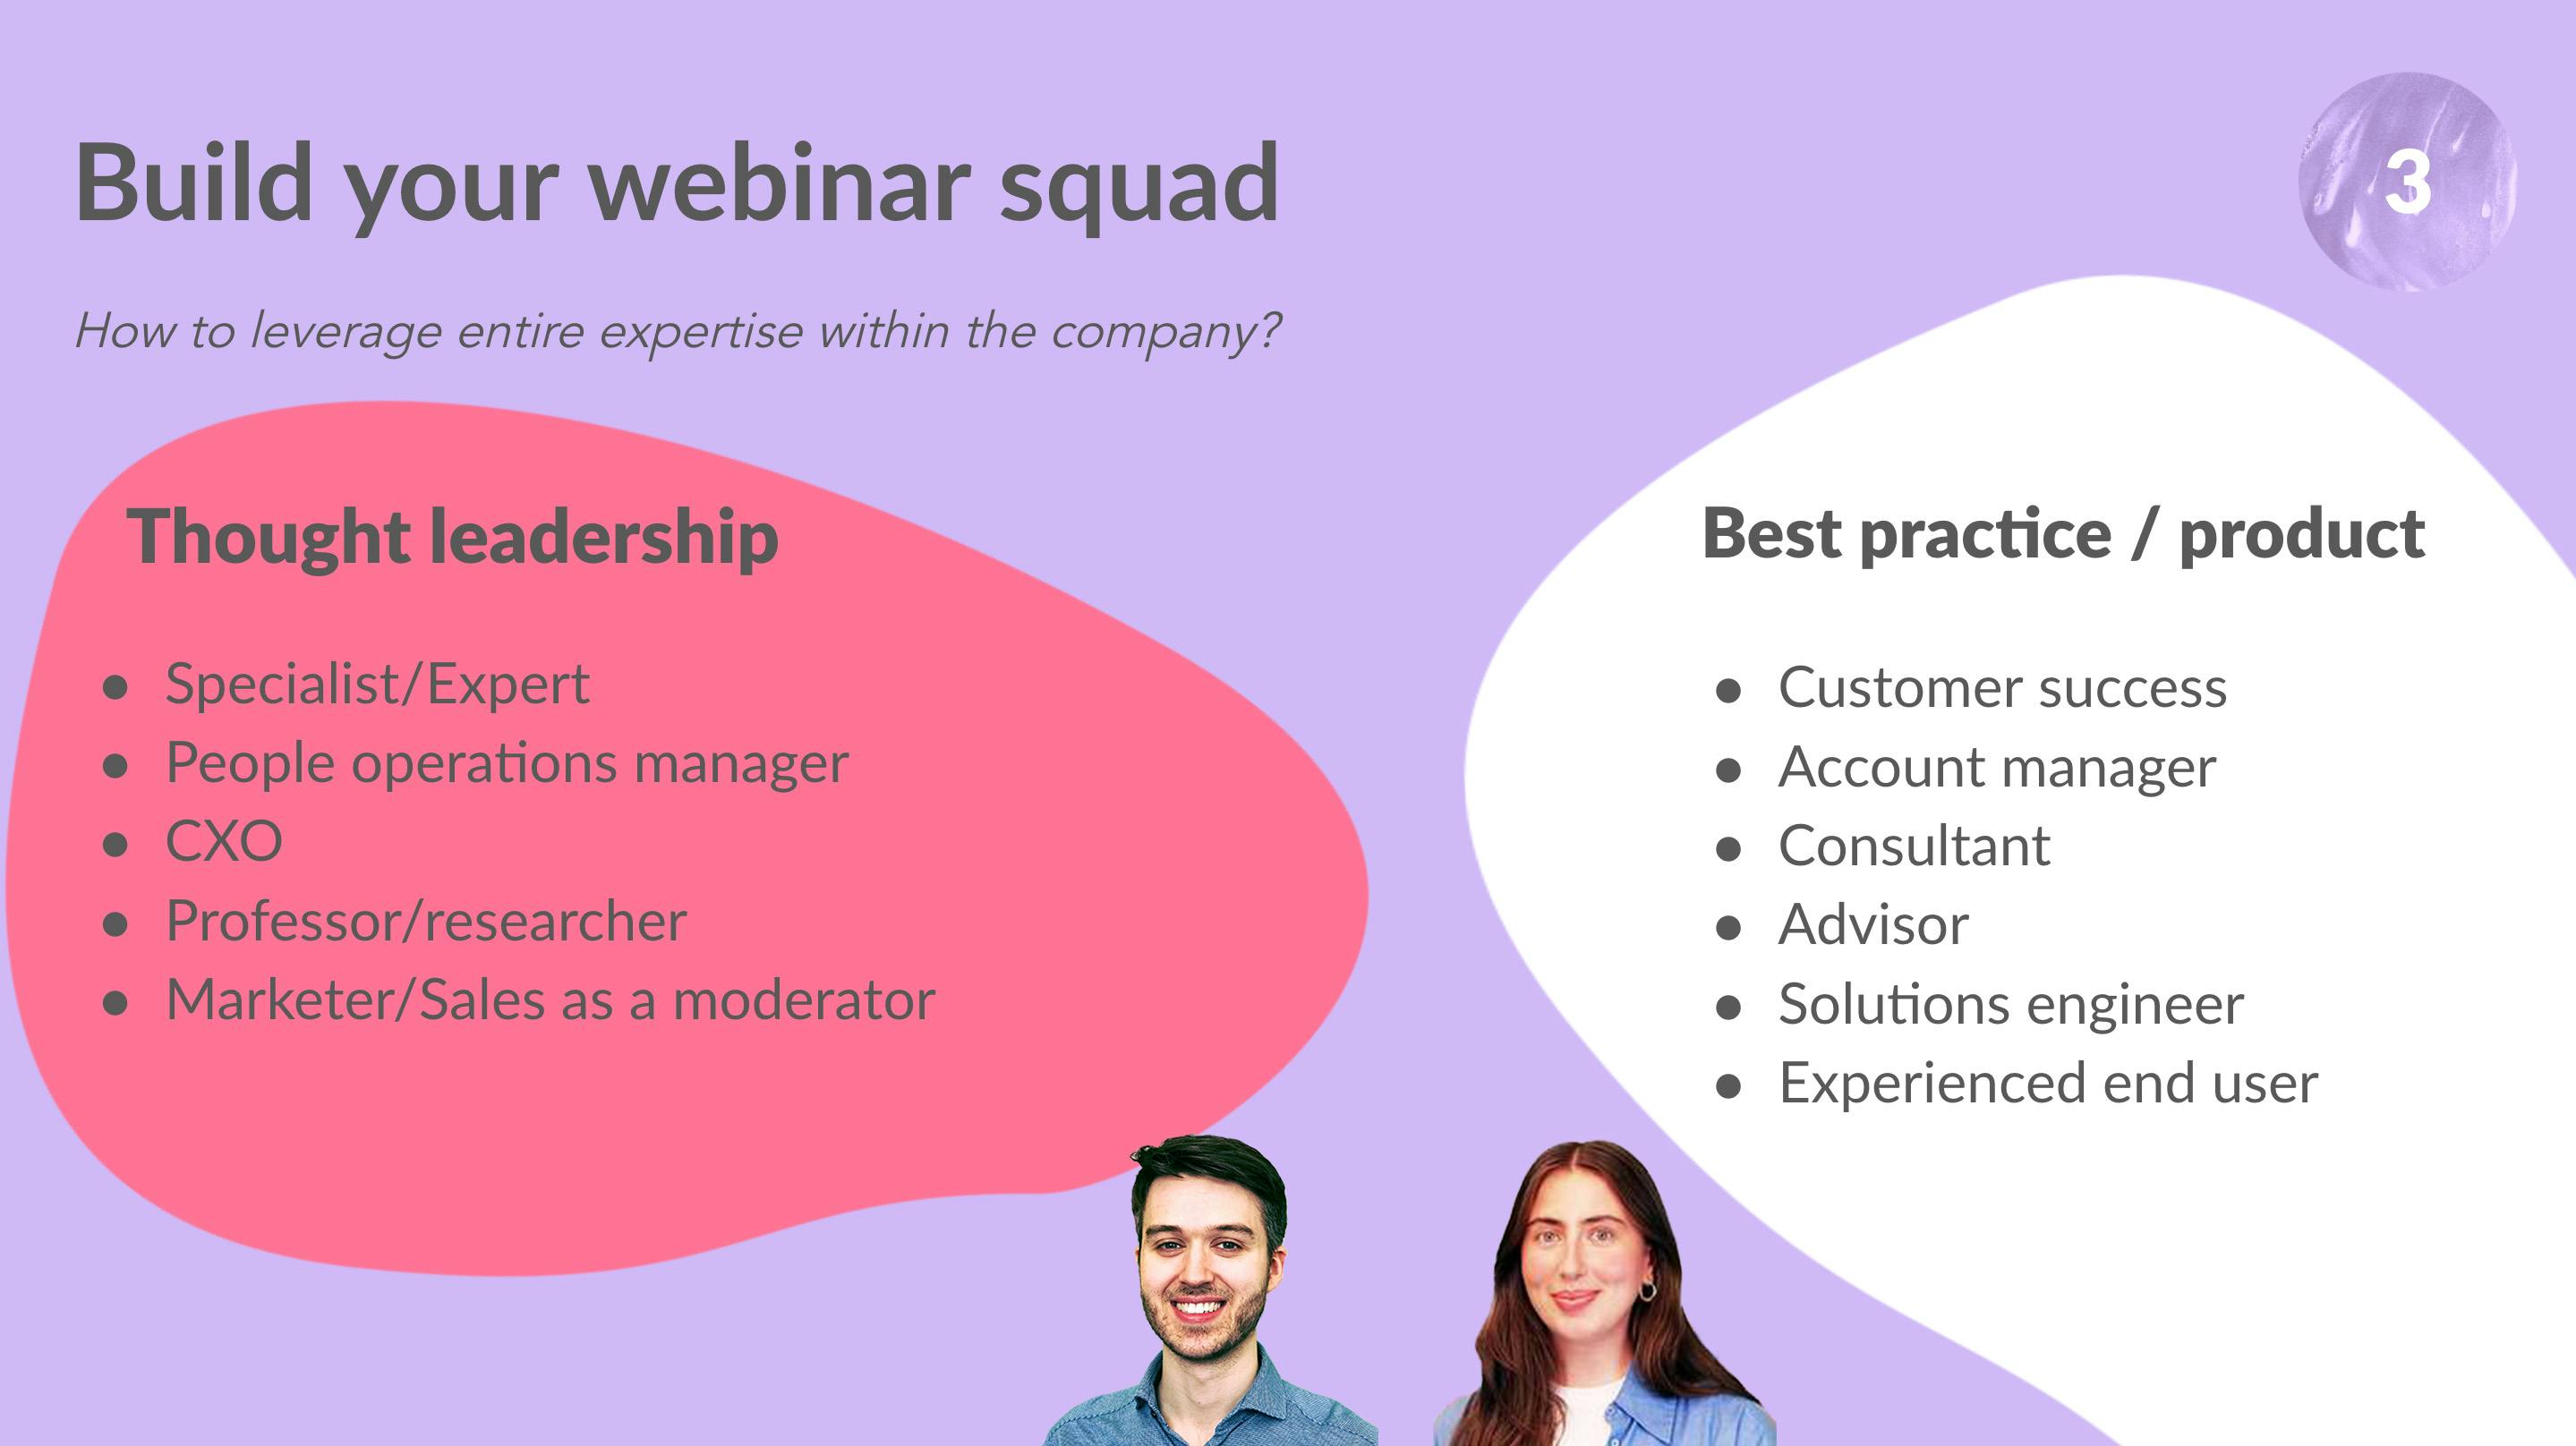 Build your webinar squad to succeed